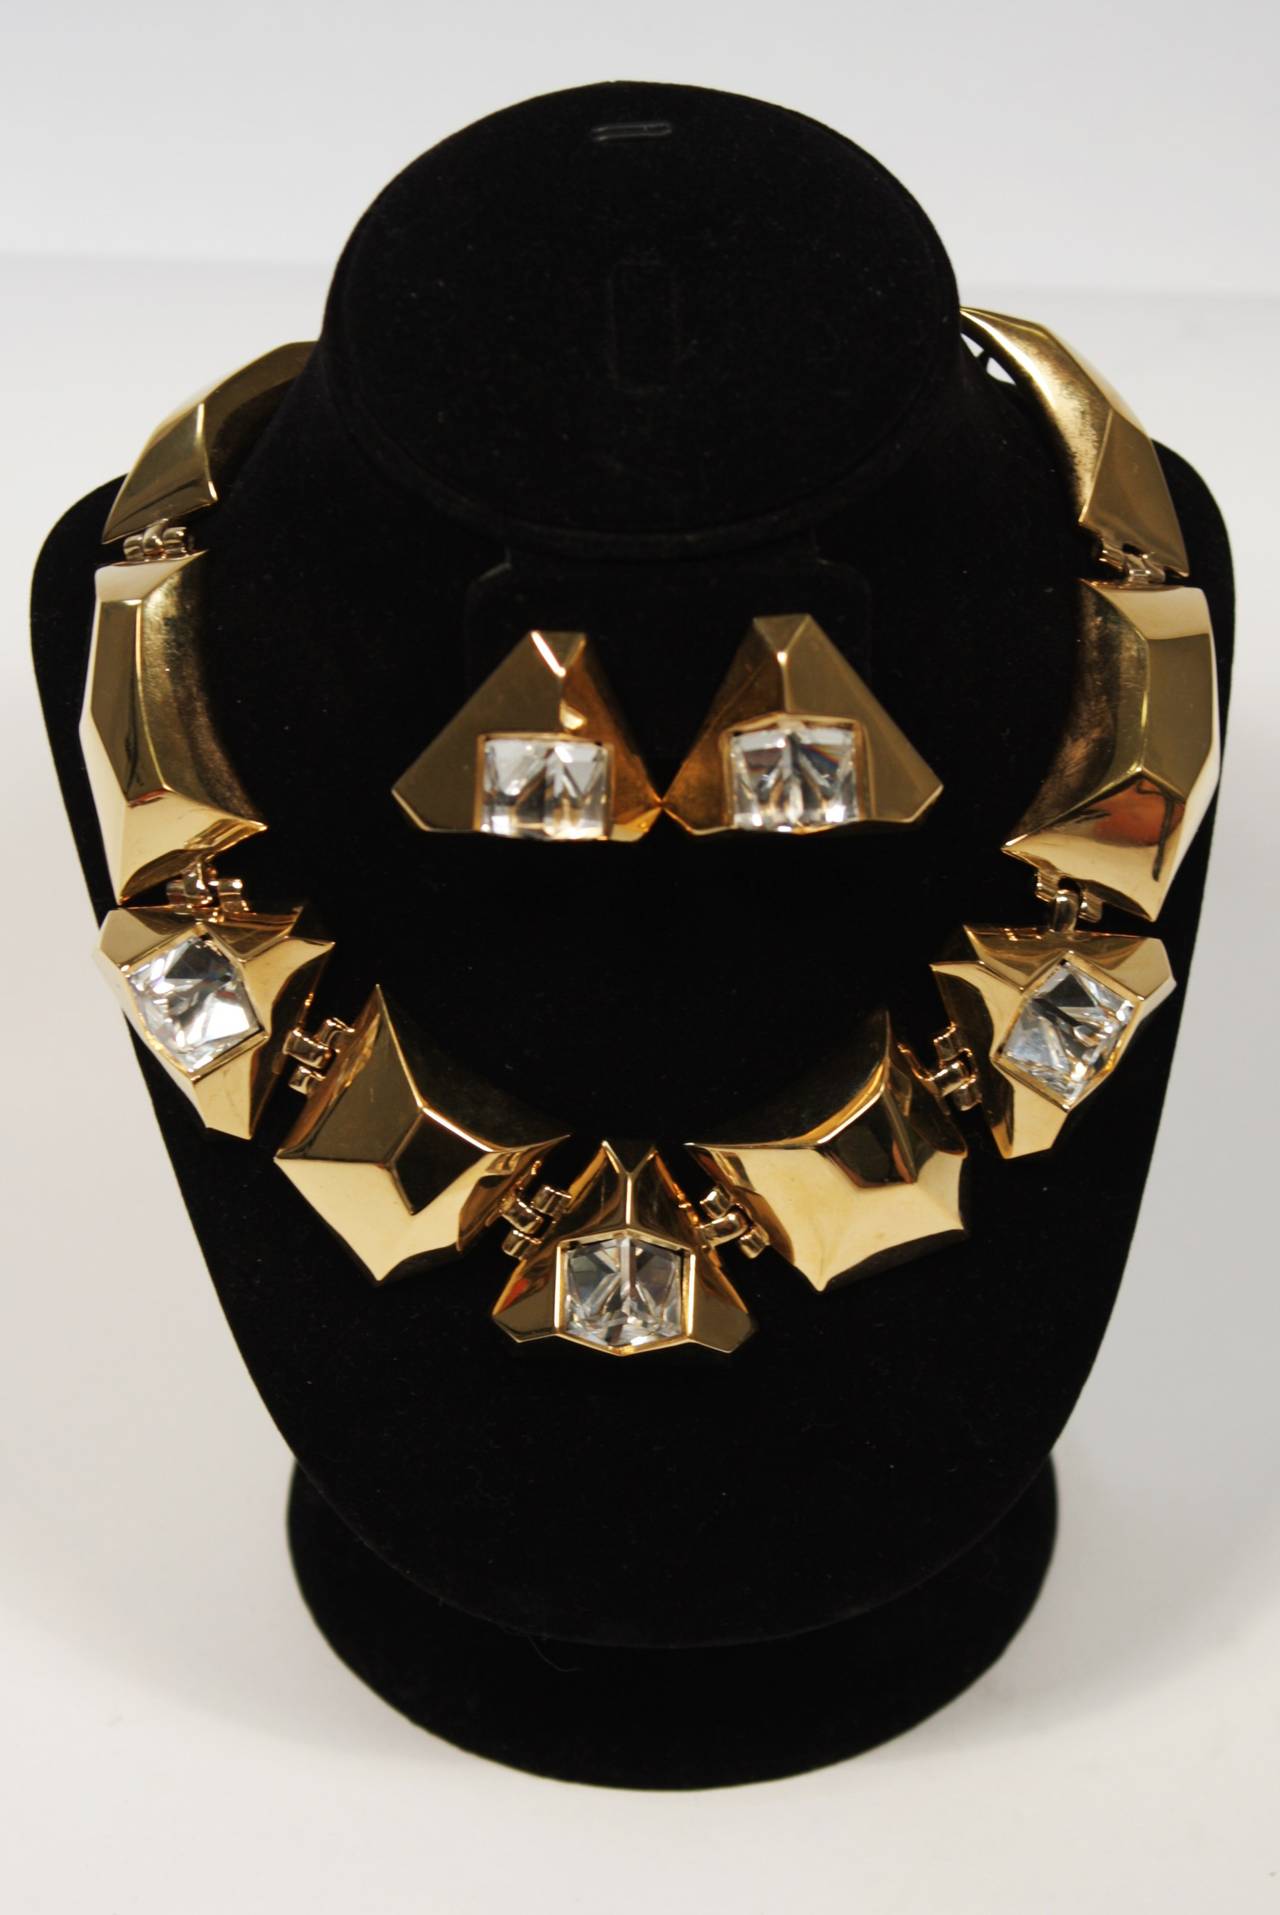 This Givenchy set is available for viewing at our Beverly Hills Boutique. The set is composed of a gold tone material and includes a necklace and earrings. They are set with a large clear rhinestone. 

Please feel free to contact us with any